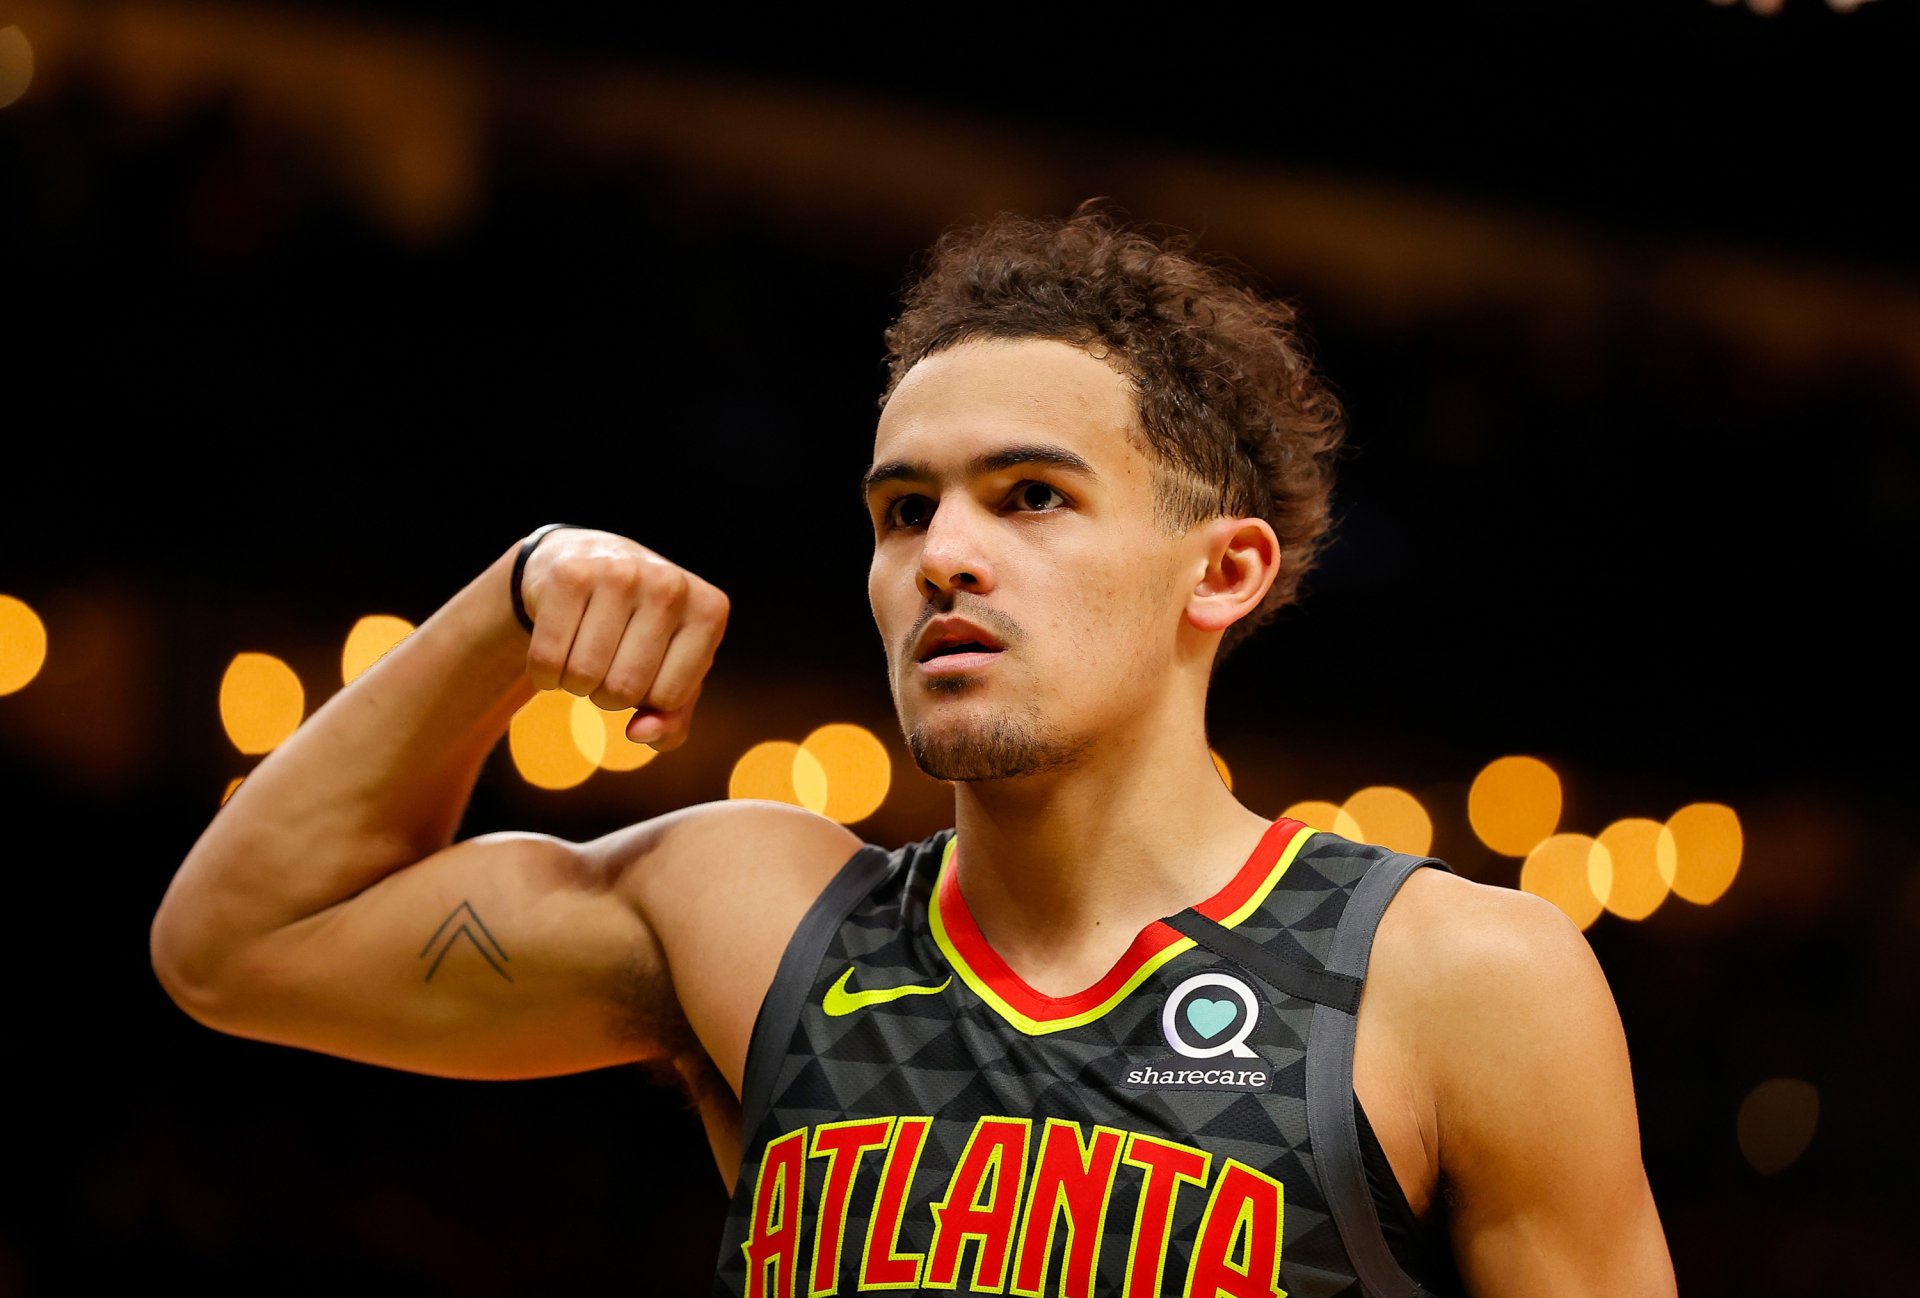 Trae Young Wallpaper - VoBss